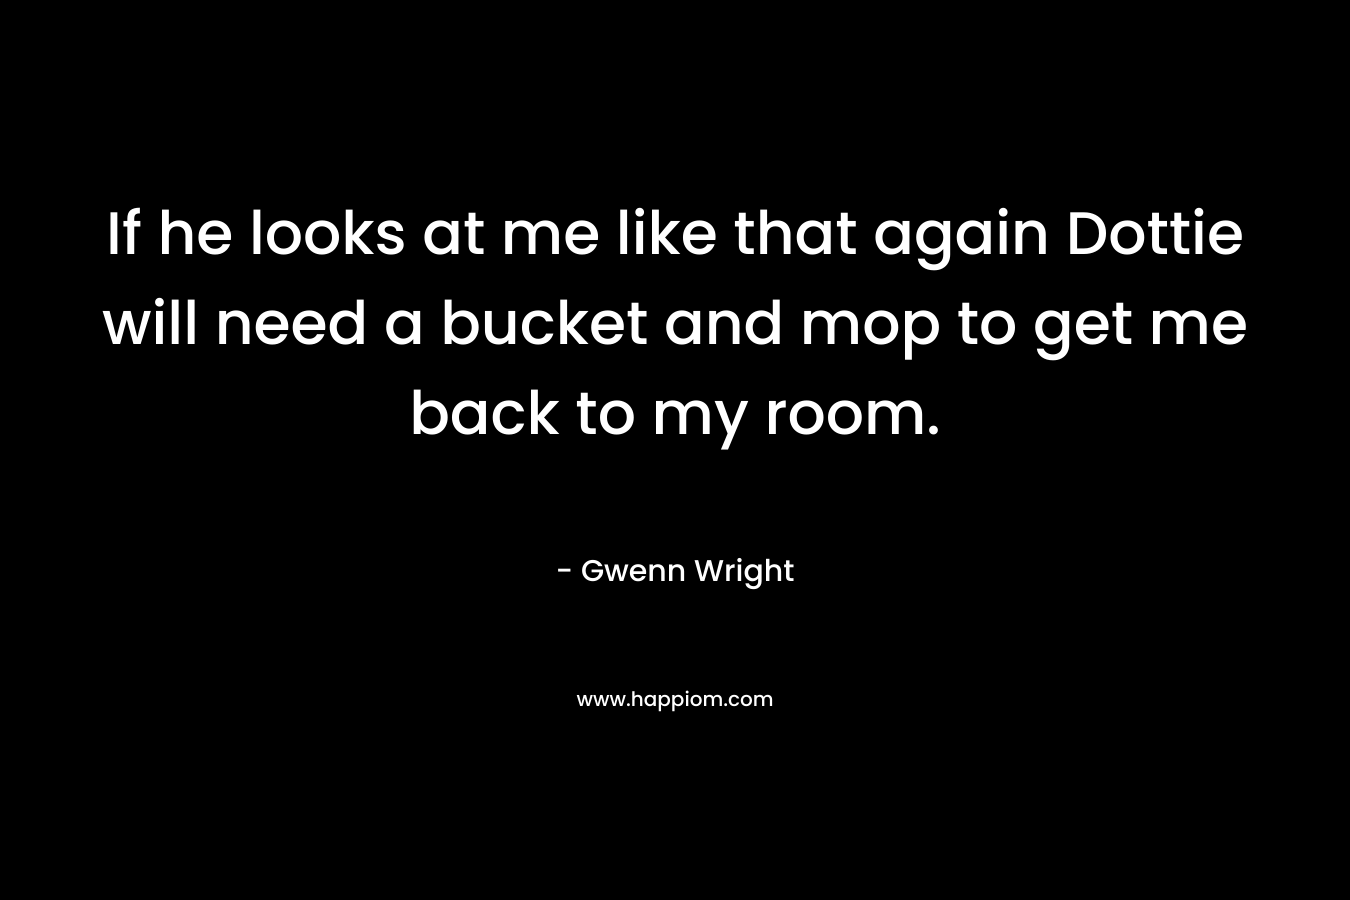 If he looks at me like that again Dottie will need a bucket and mop to get me back to my room. – Gwenn Wright